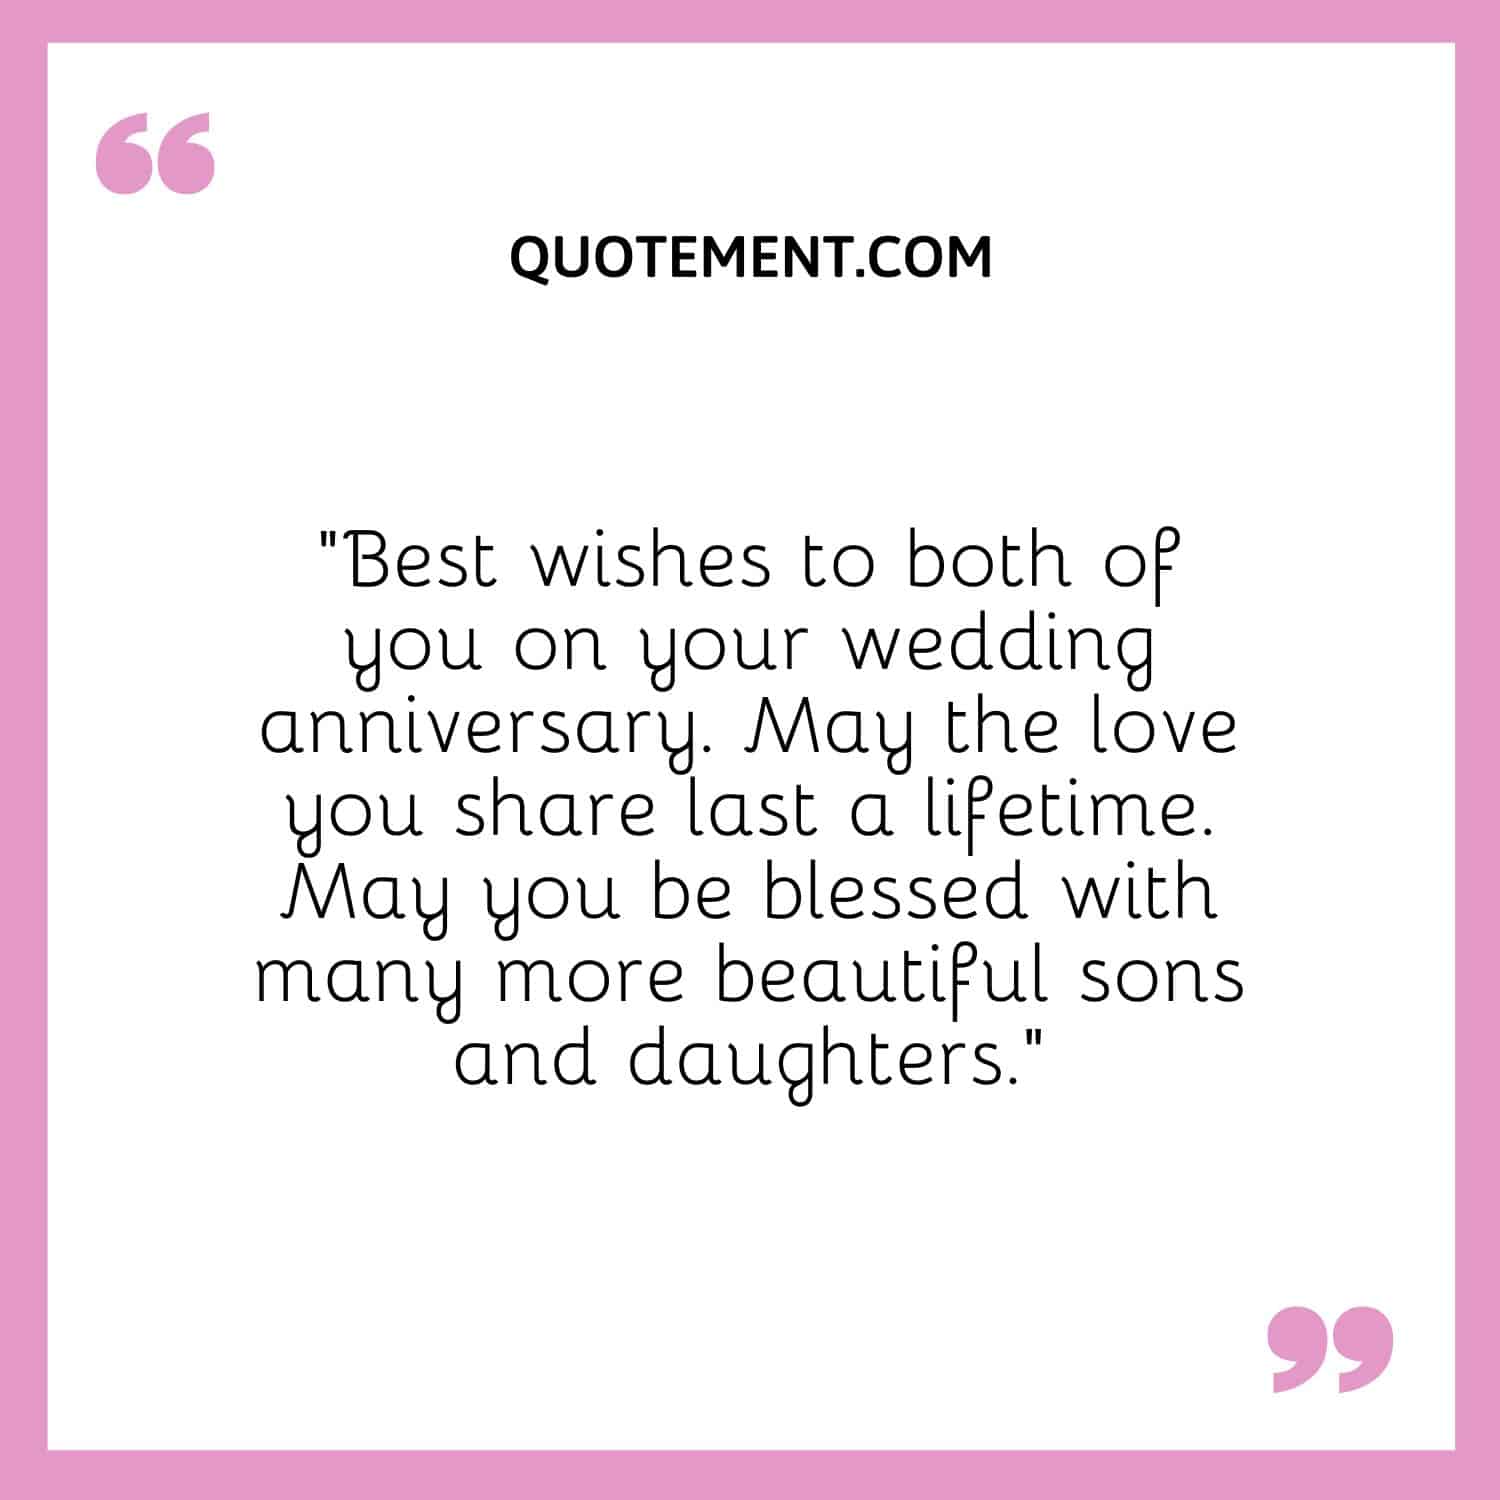 Best wishes to both of you on your wedding anniversary